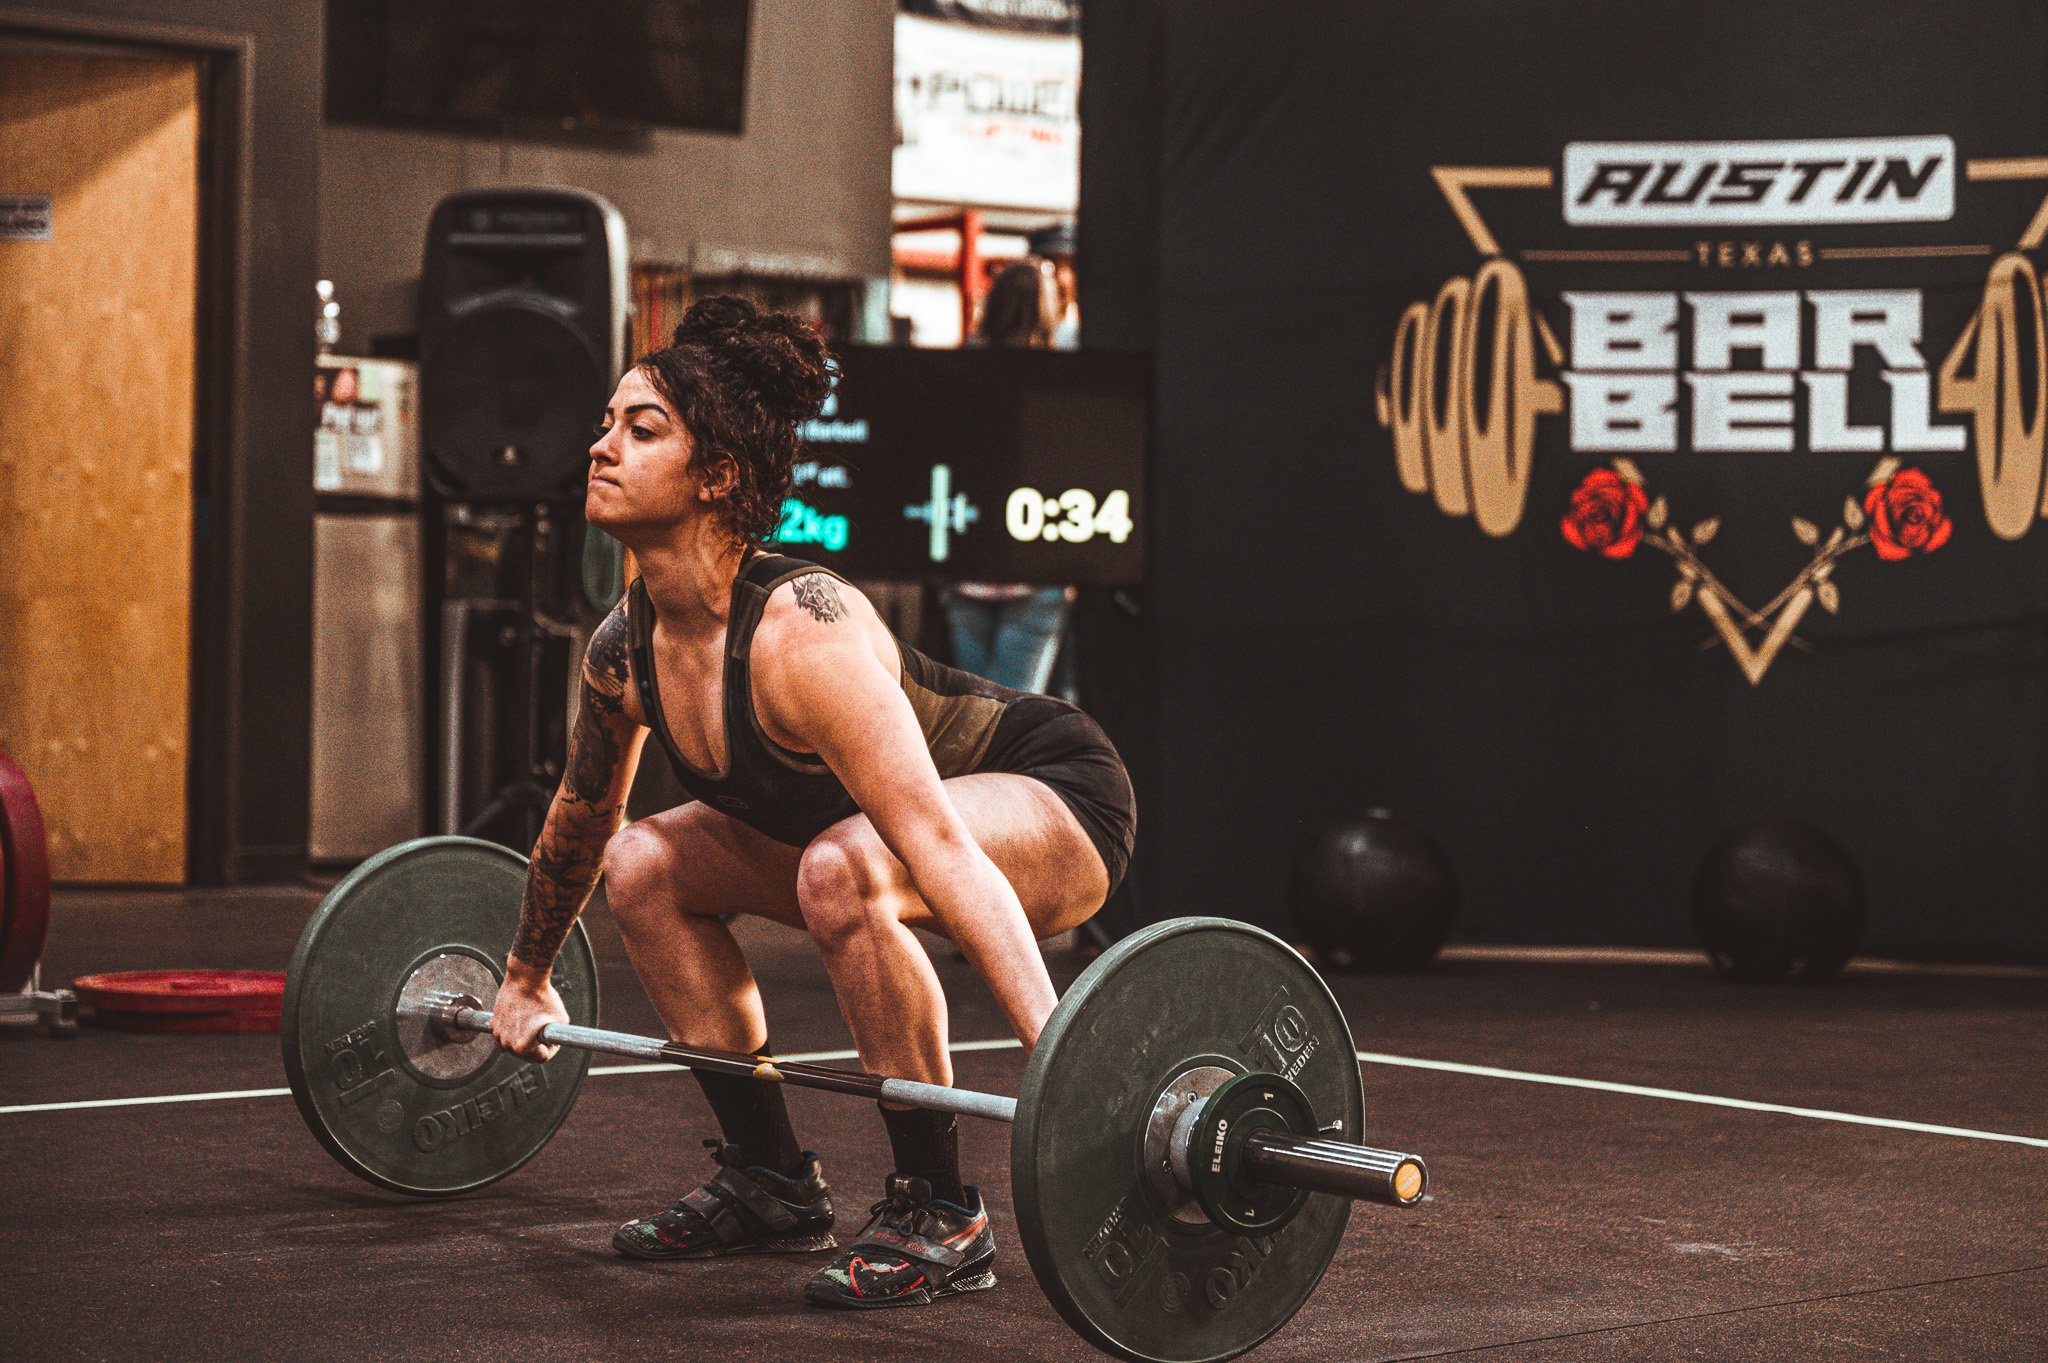 Weightlifting Competitions and Events